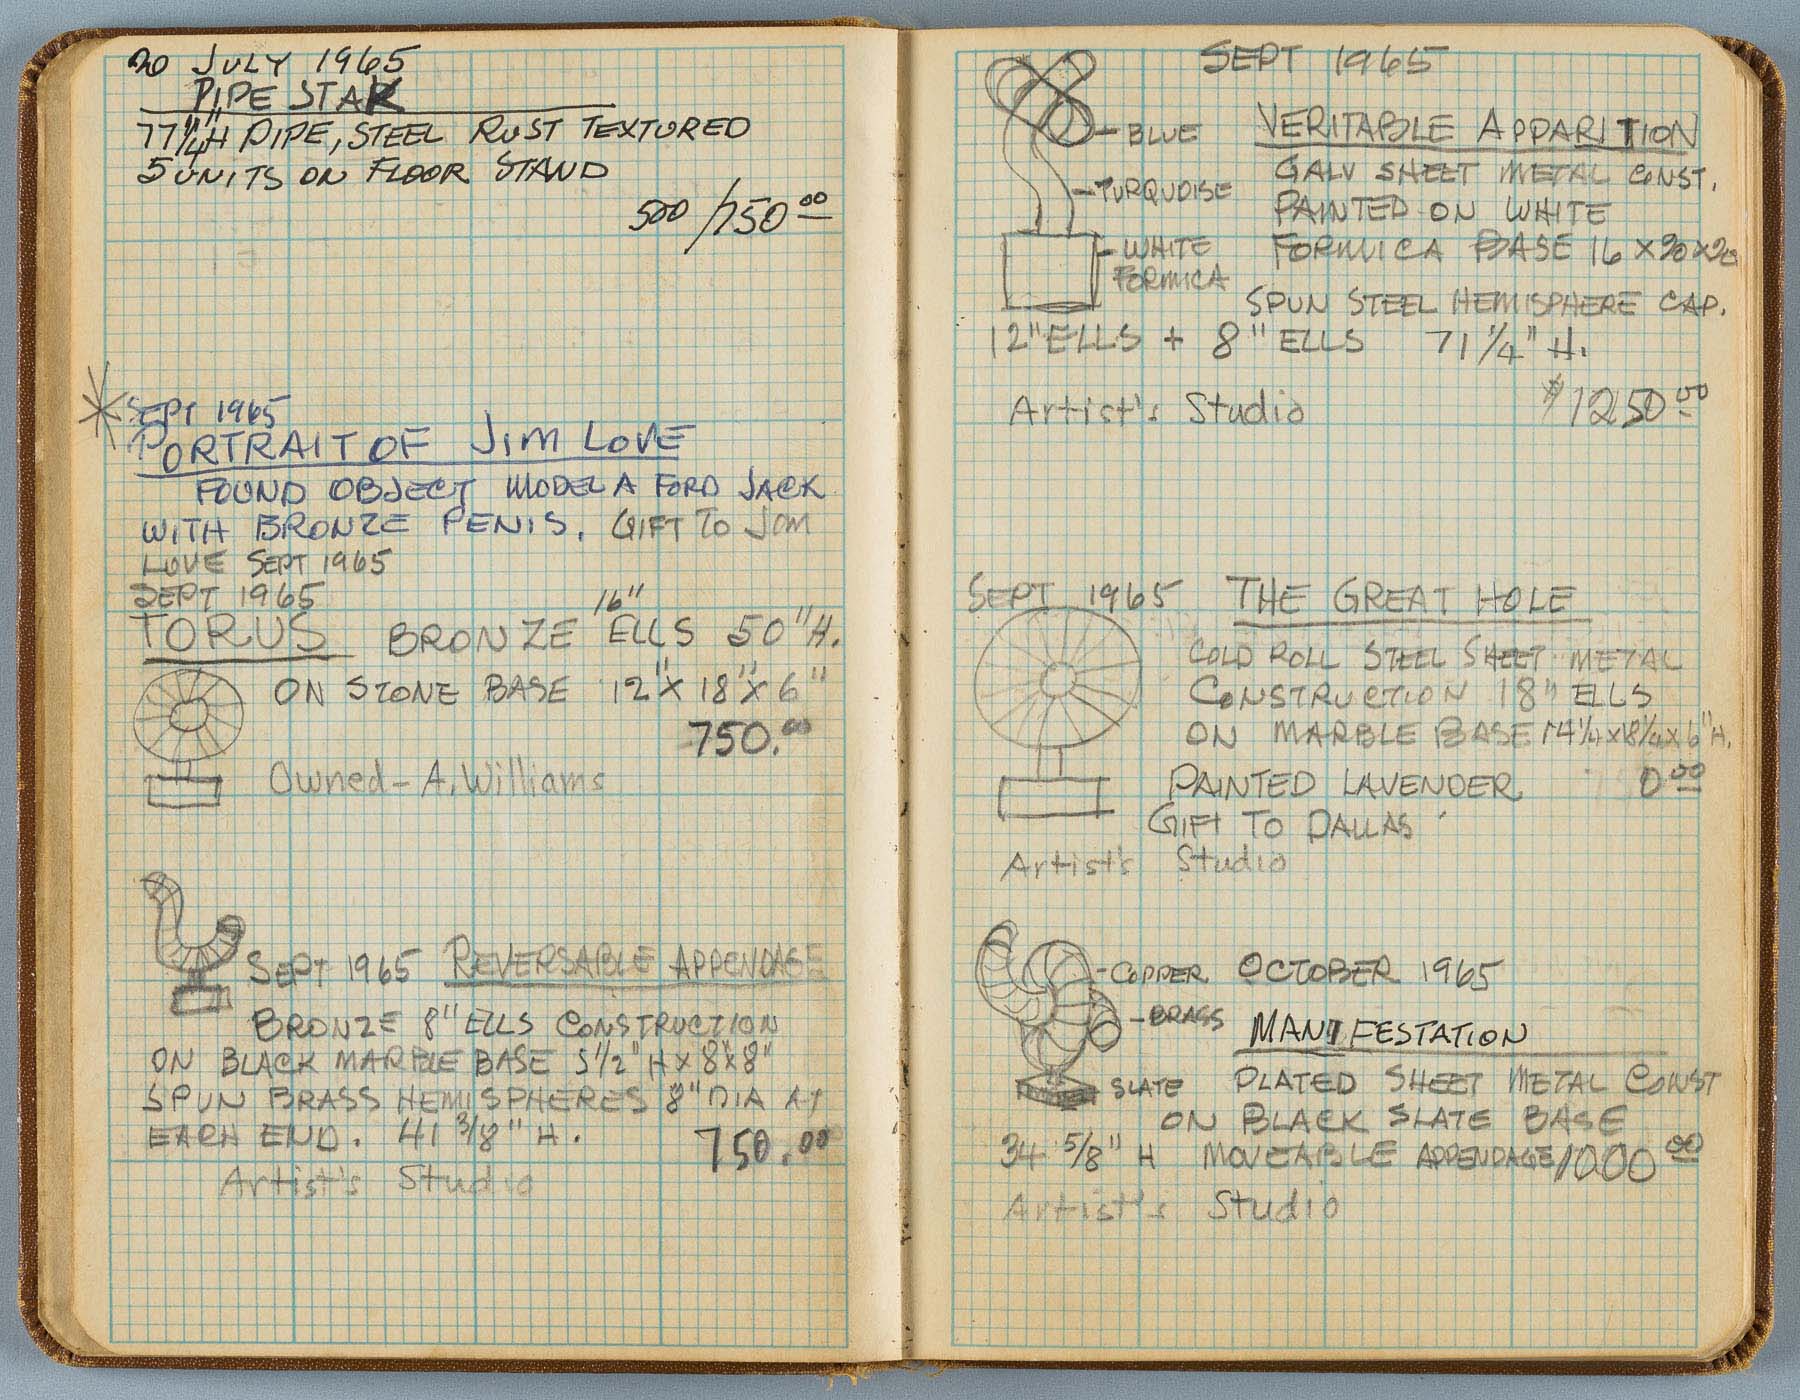 Artist Charles T. Williams' open ledger with handwritten notes and sketches for several different sculptures.